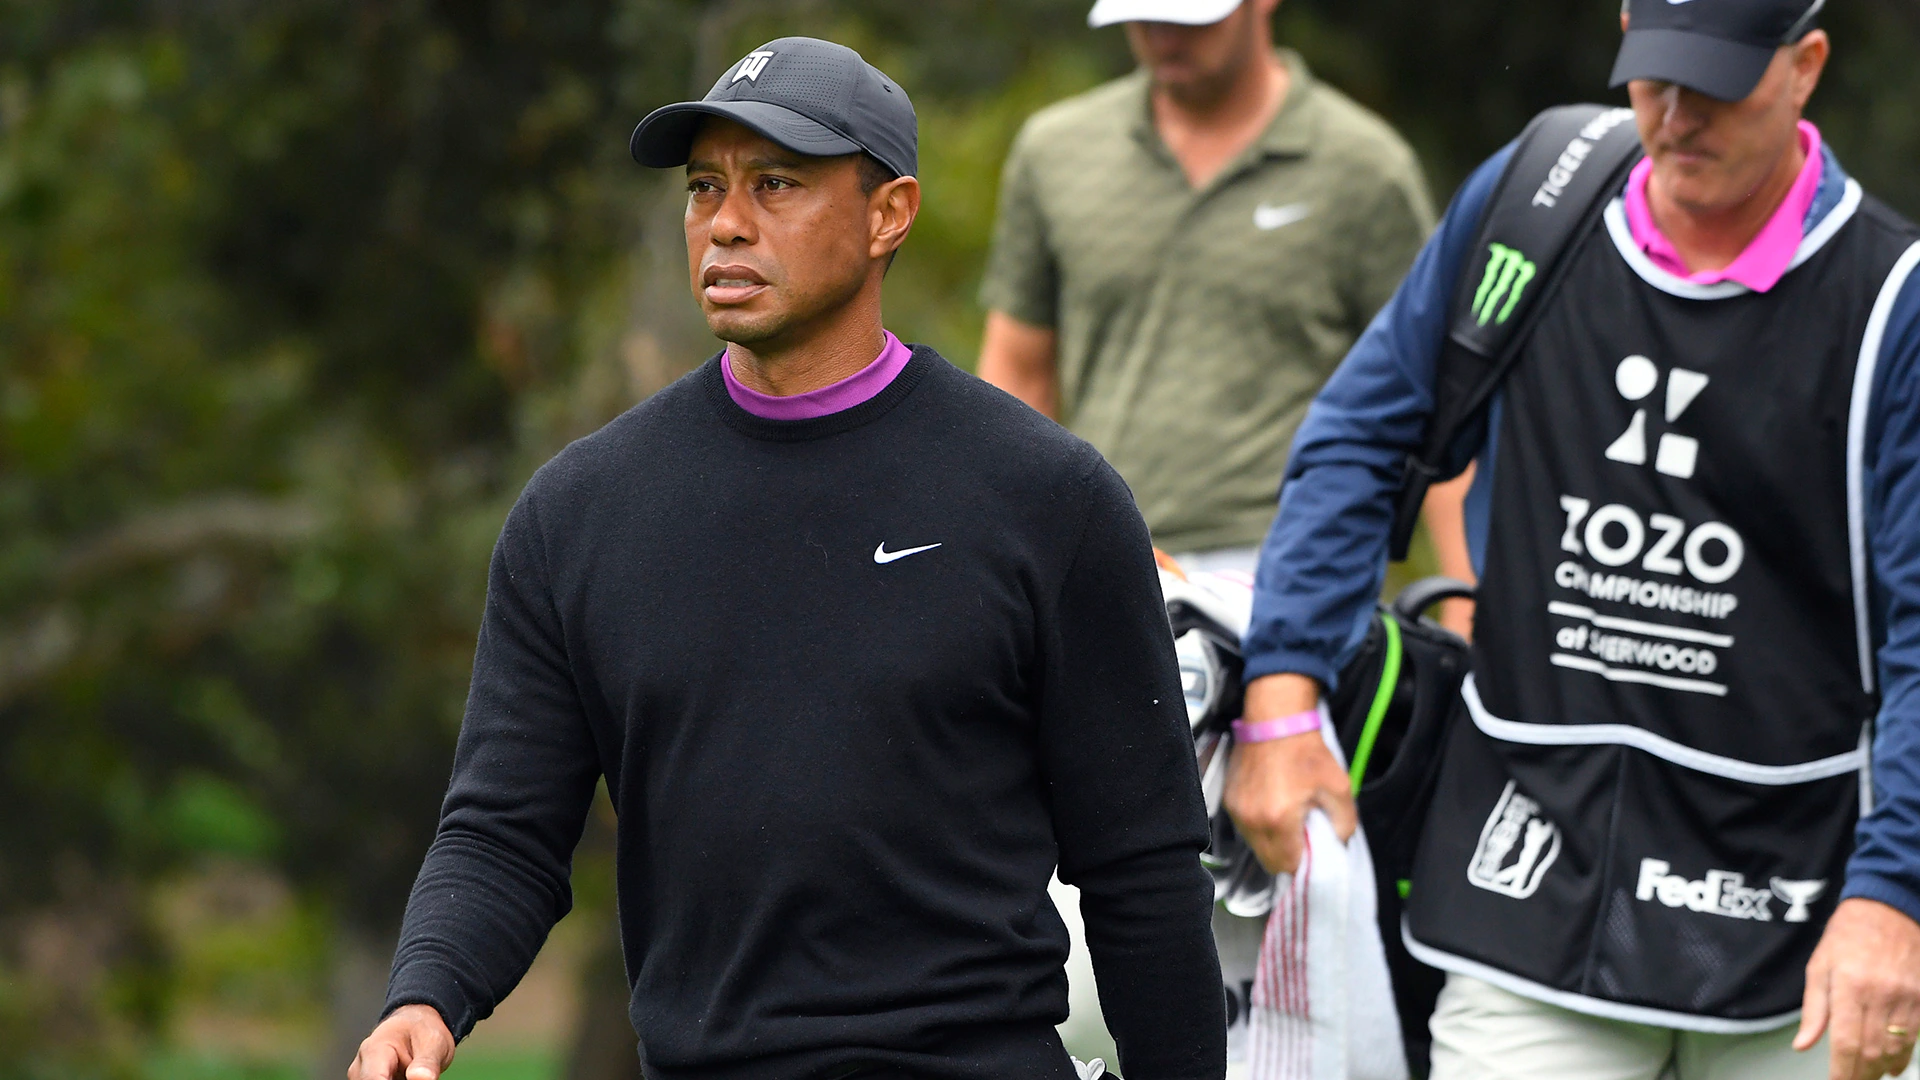 ‘I am back home’: Tiger Woods returns to Florida to continue recovery process